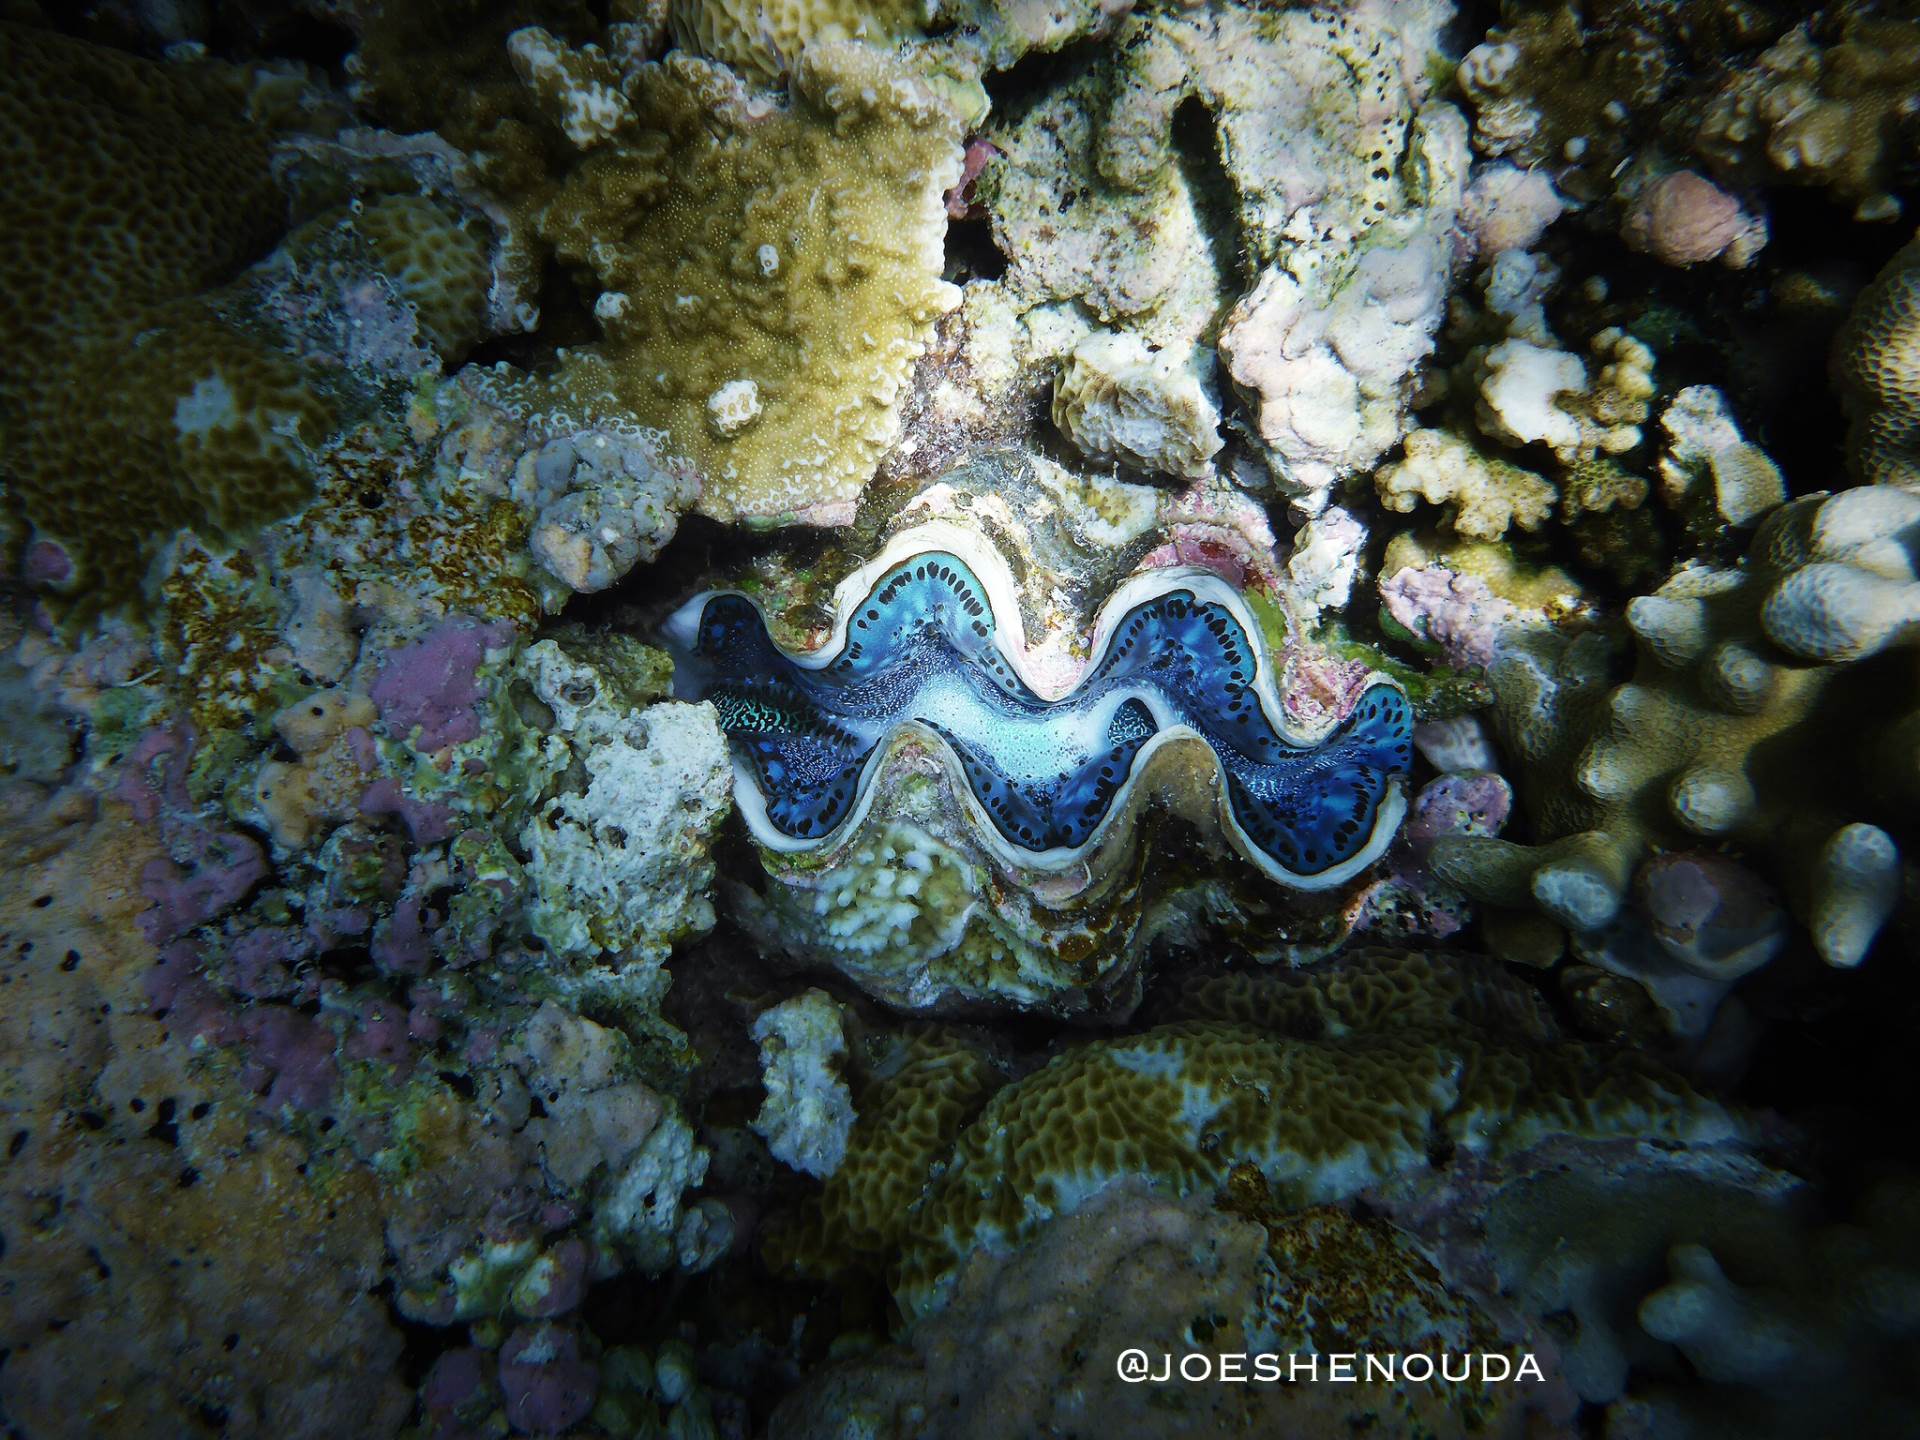 Palau 🇵🇼 is home to 8️⃣ of the 🔟 known species of giant clams 🐚 , making it one of the epicenters of giant clam diversity in the world 🌎 .